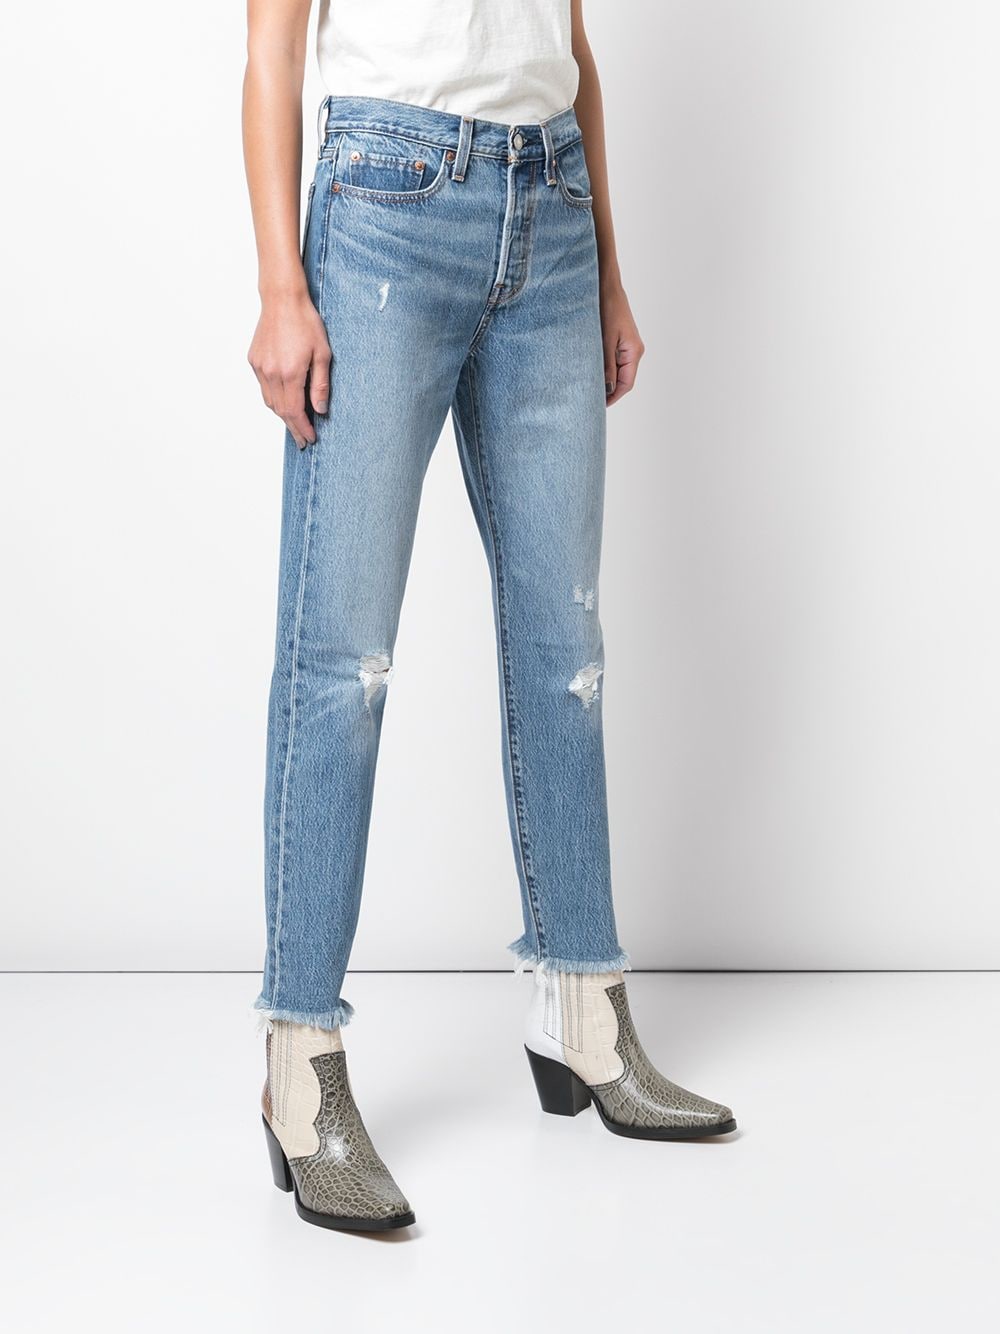 LEVIS F- WEDGIE JEANS